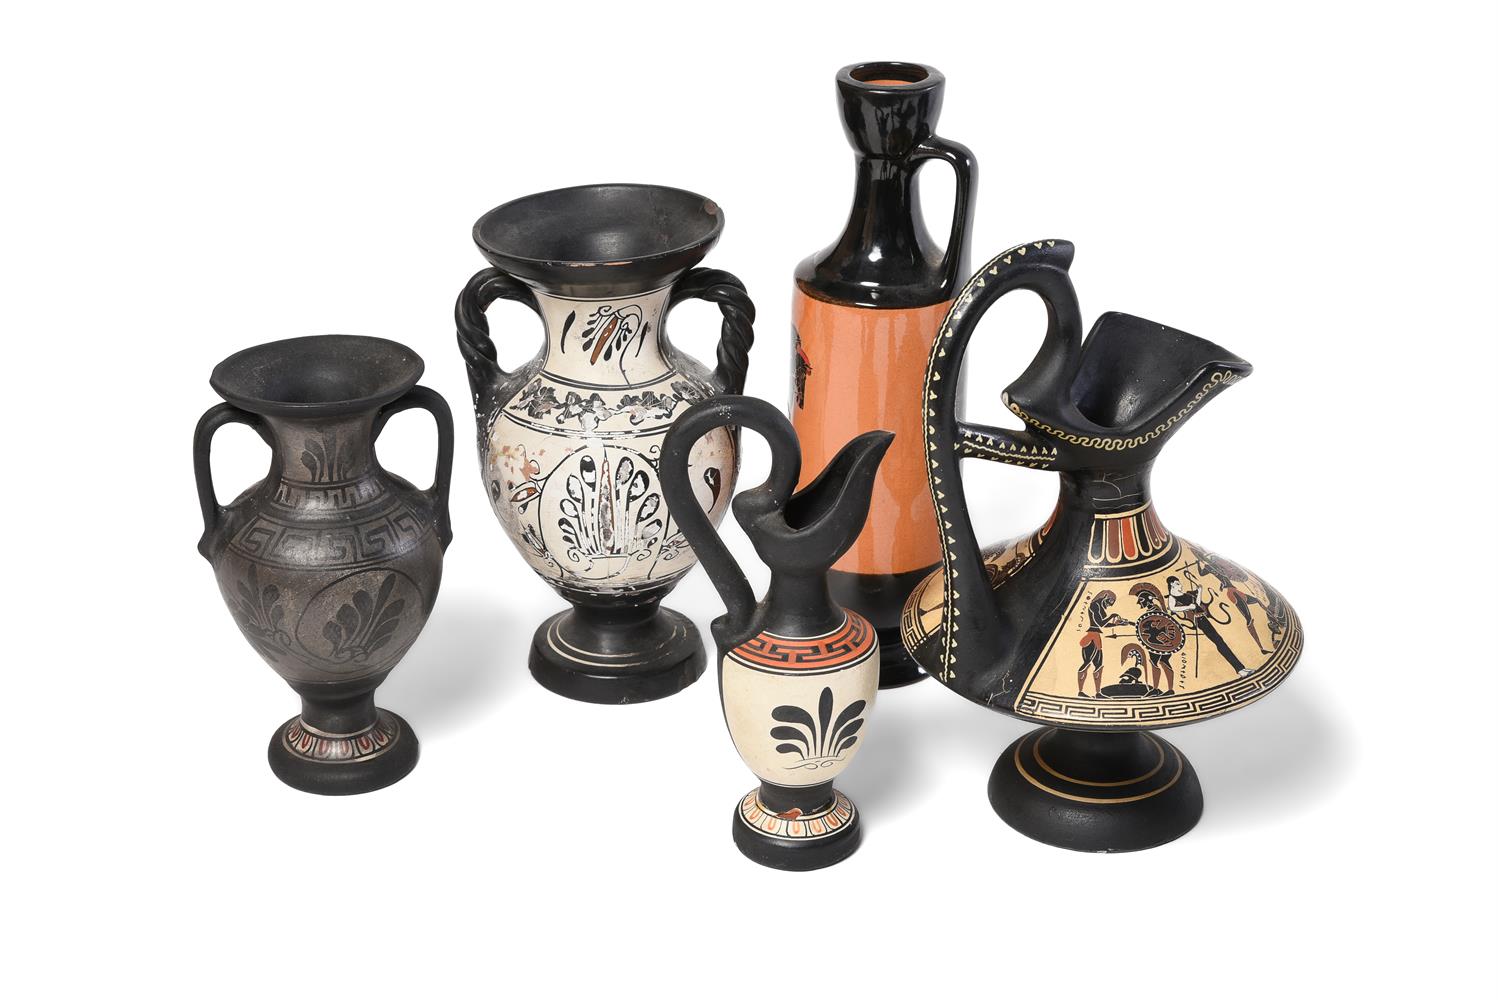 TEN VARIOUS COLD PAINTED TERRACOTTA GREEK STYLE VASES AND JUGS AFTER THE ANTIQUE - Image 5 of 5